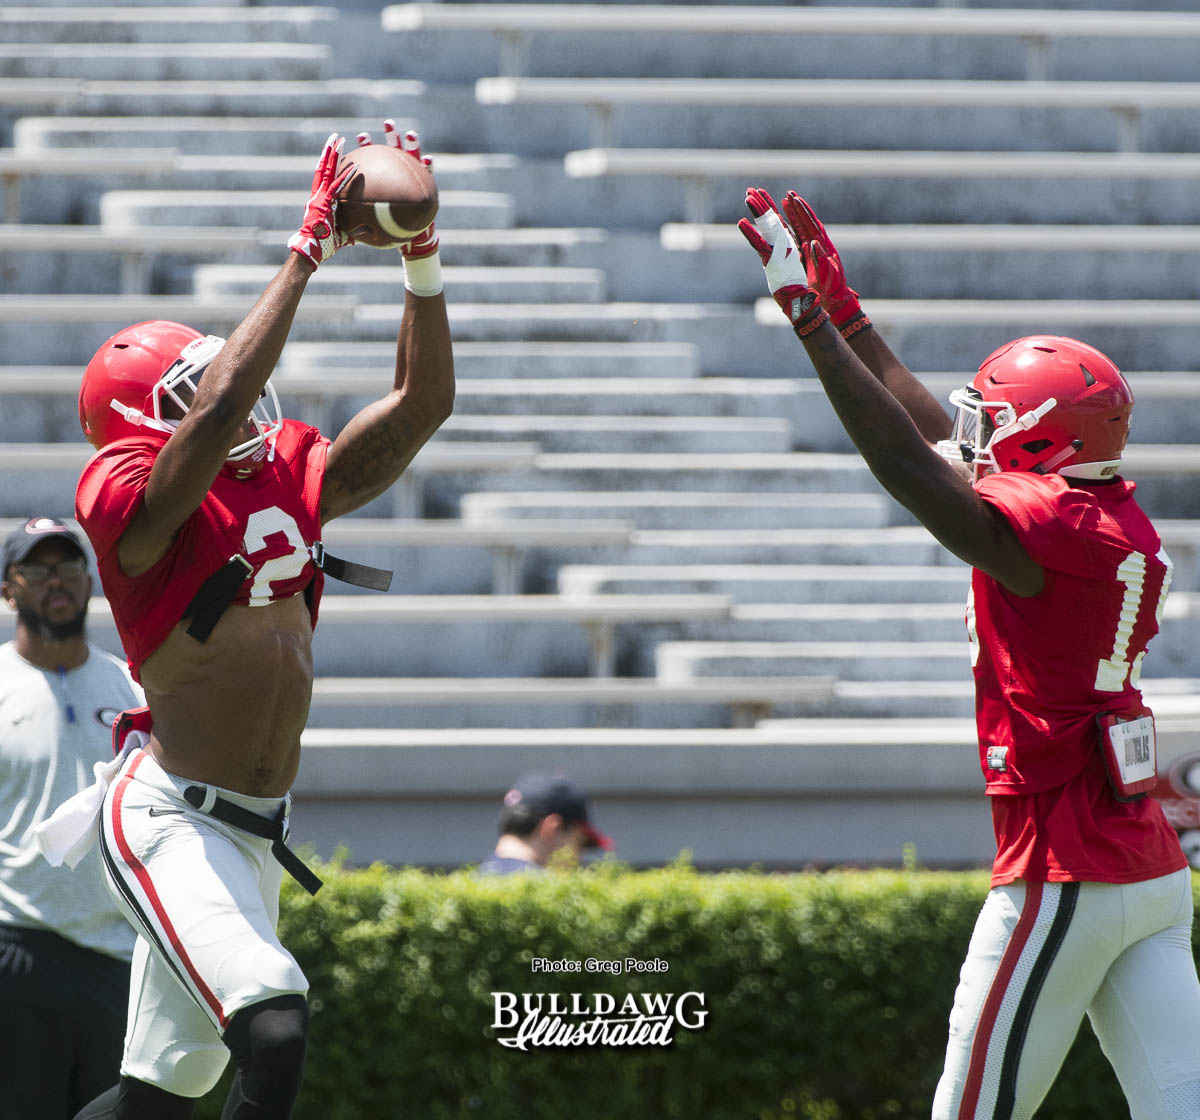 Jayson Stanley (2) makes the catch in pre-scrimmage warm-ups on Saturday